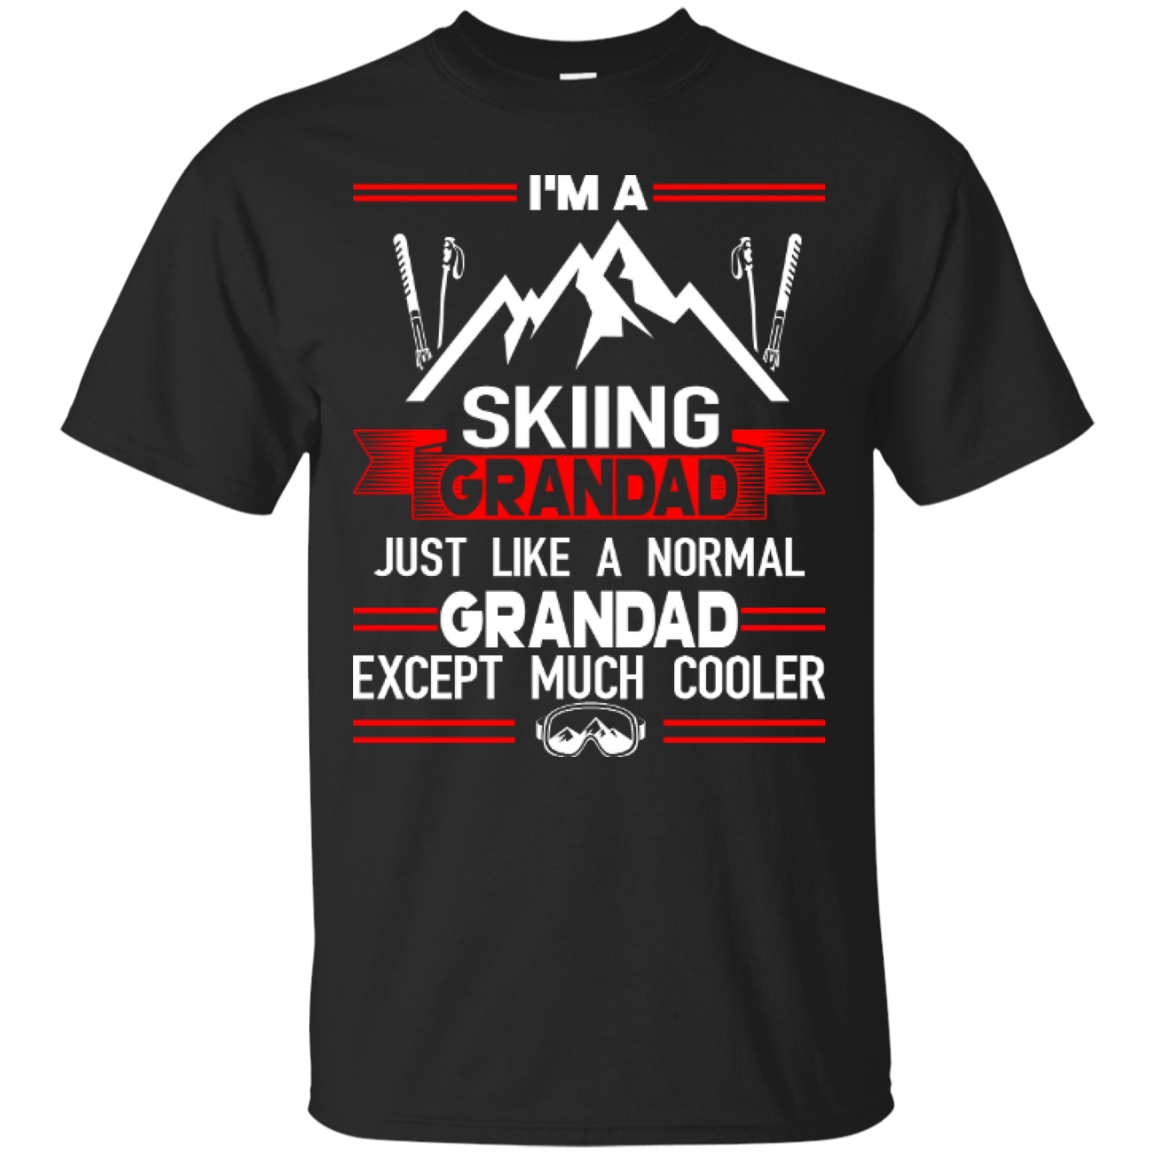 I'm A Skiing Grandad Just Like A Normal Grandad Except Much Cooler Tees - Powderaddicts